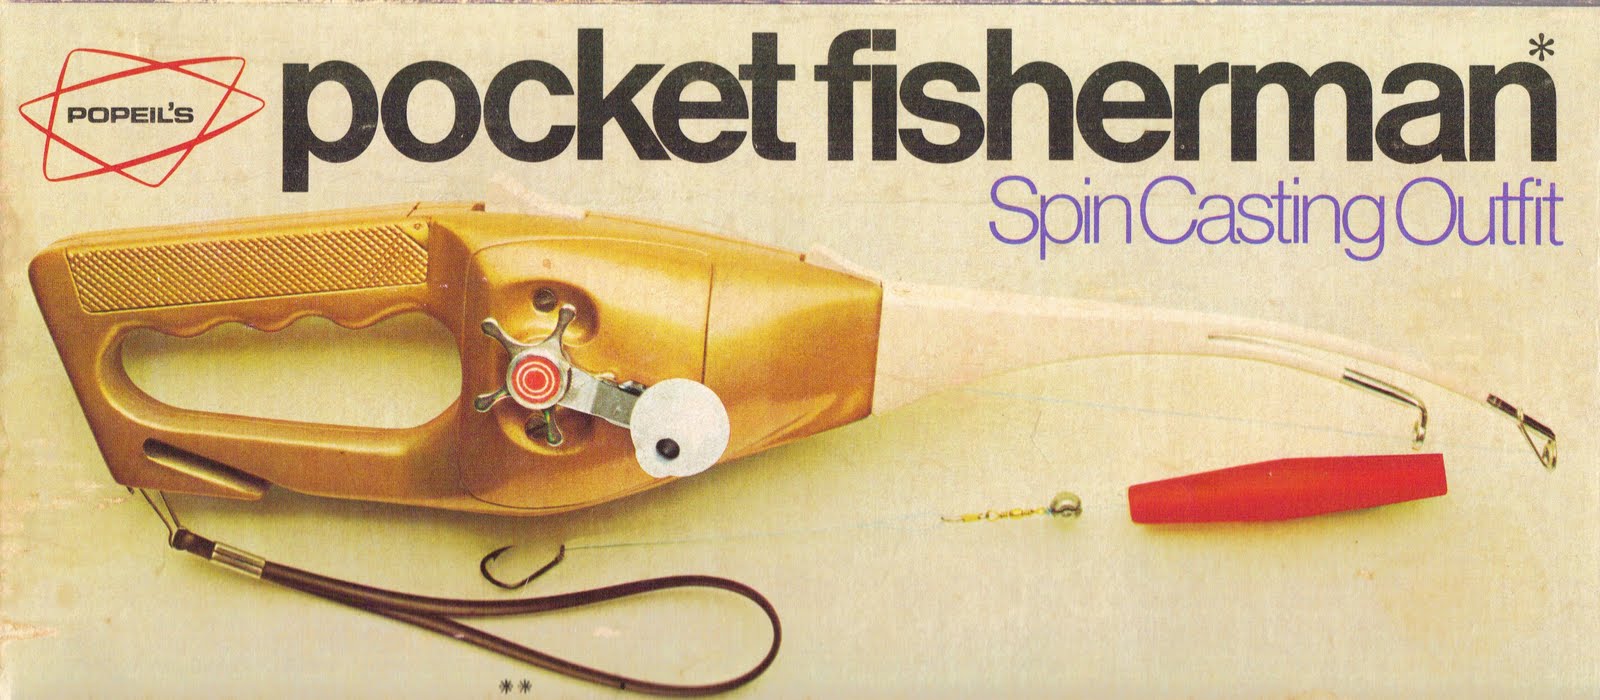 Chuck's Tackle Box: The Pocket Fisherman and other fishing poles gone amuck!